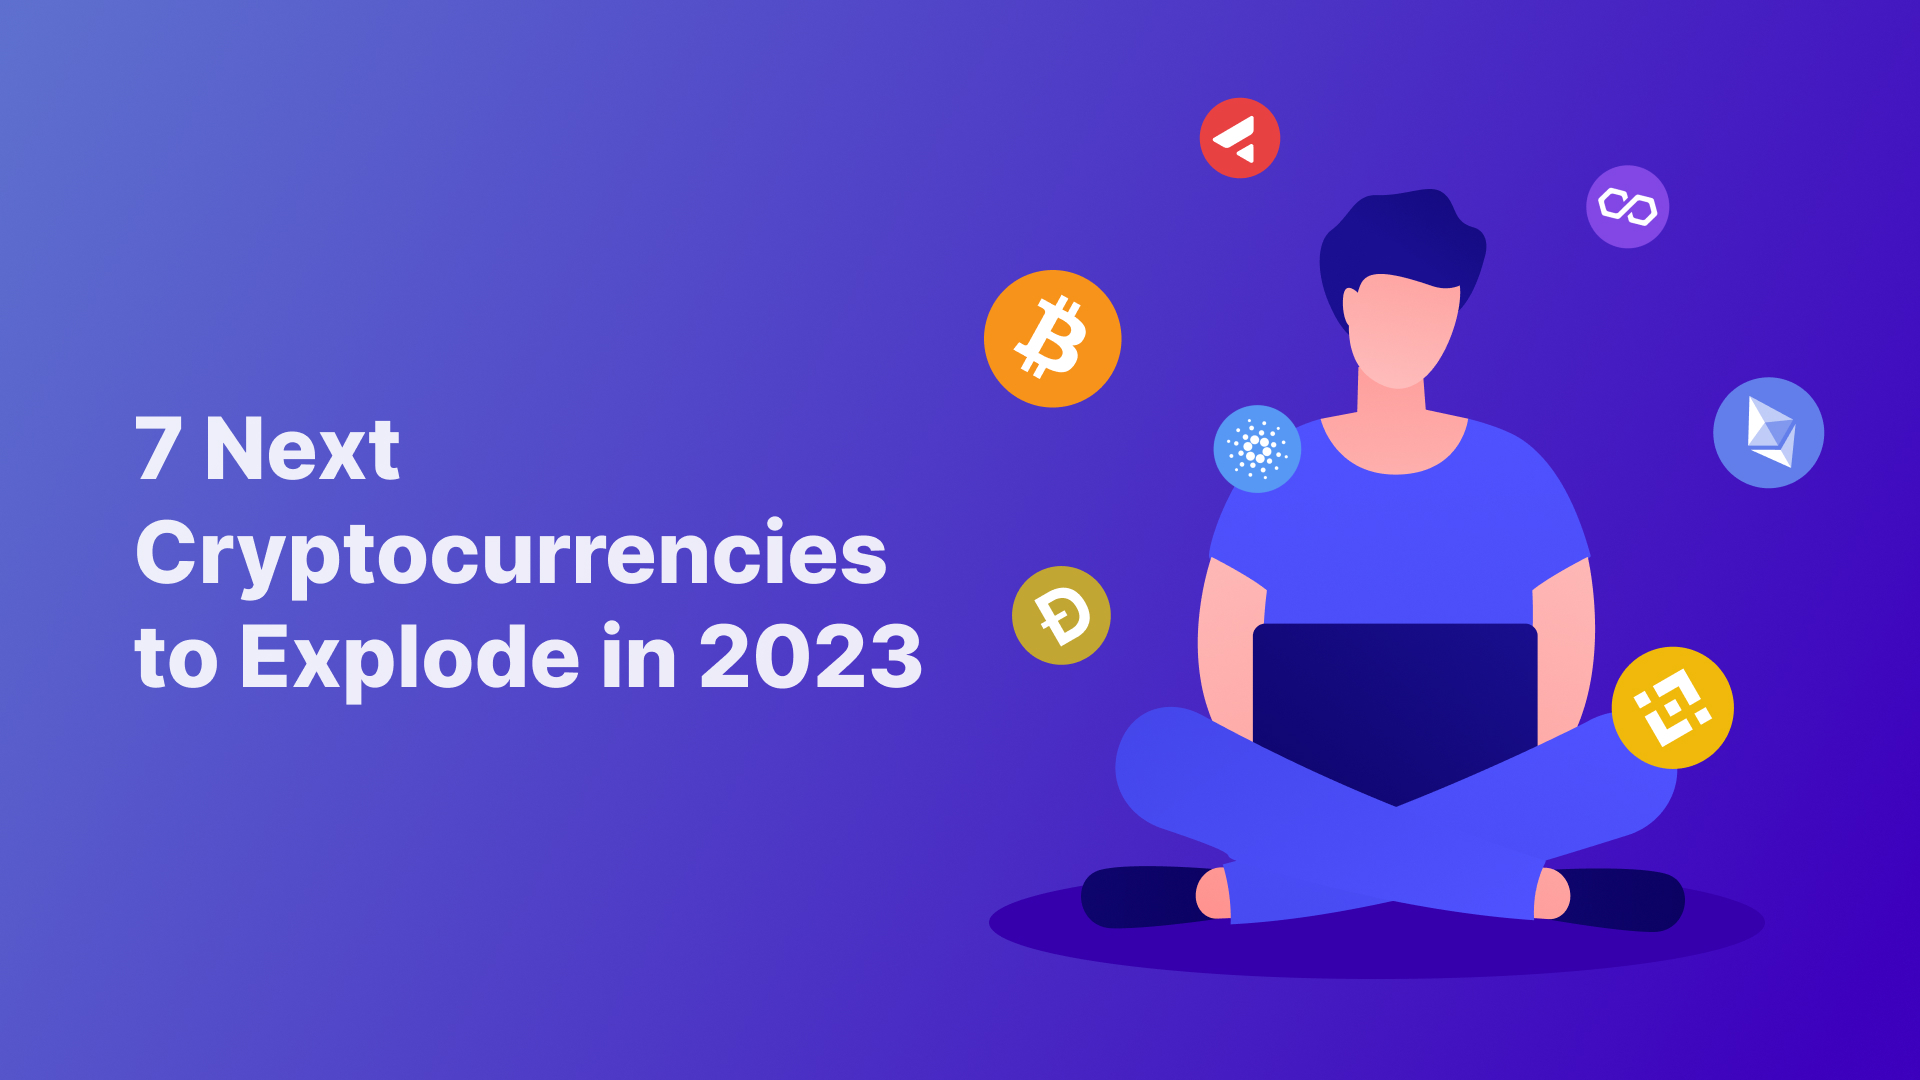 7 Next Cryptocurrencies to Explode in 2023